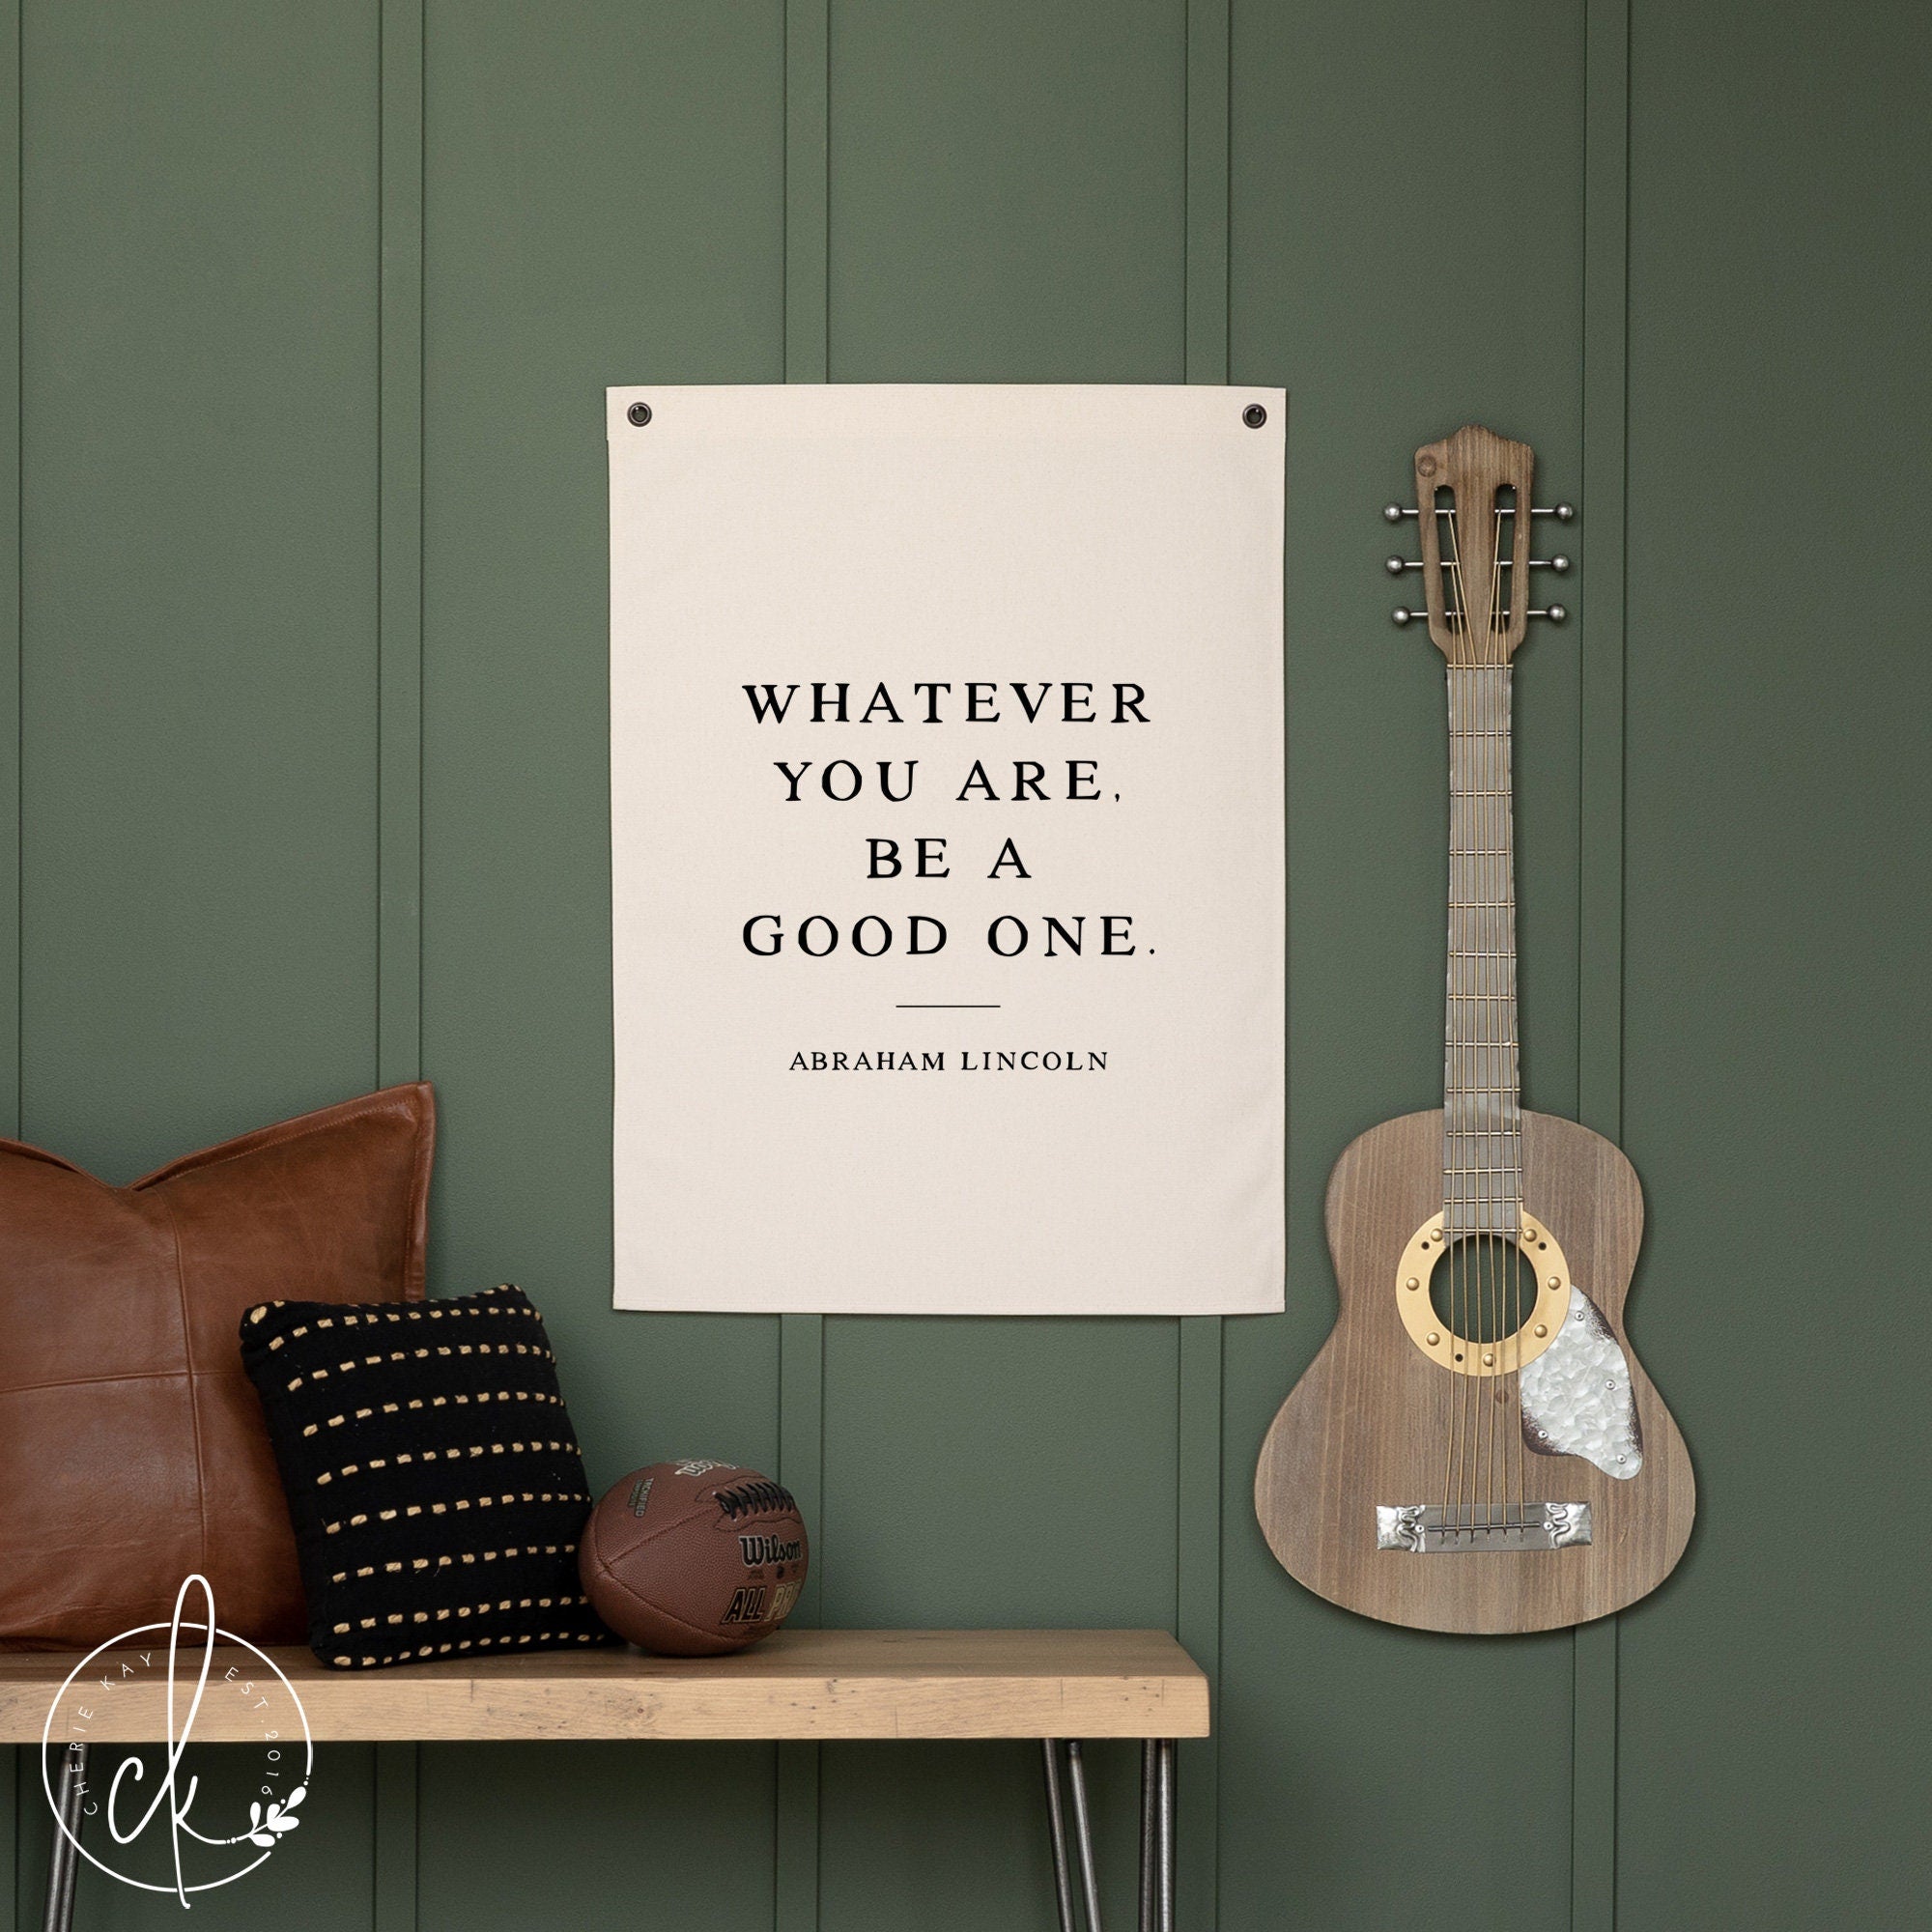 Whatever You Are Be A Good One | Canvas Flag | Motivational Quote Wall Decor | Boys Room Decor | Kids Room Wall Art | Abraham Lincoln